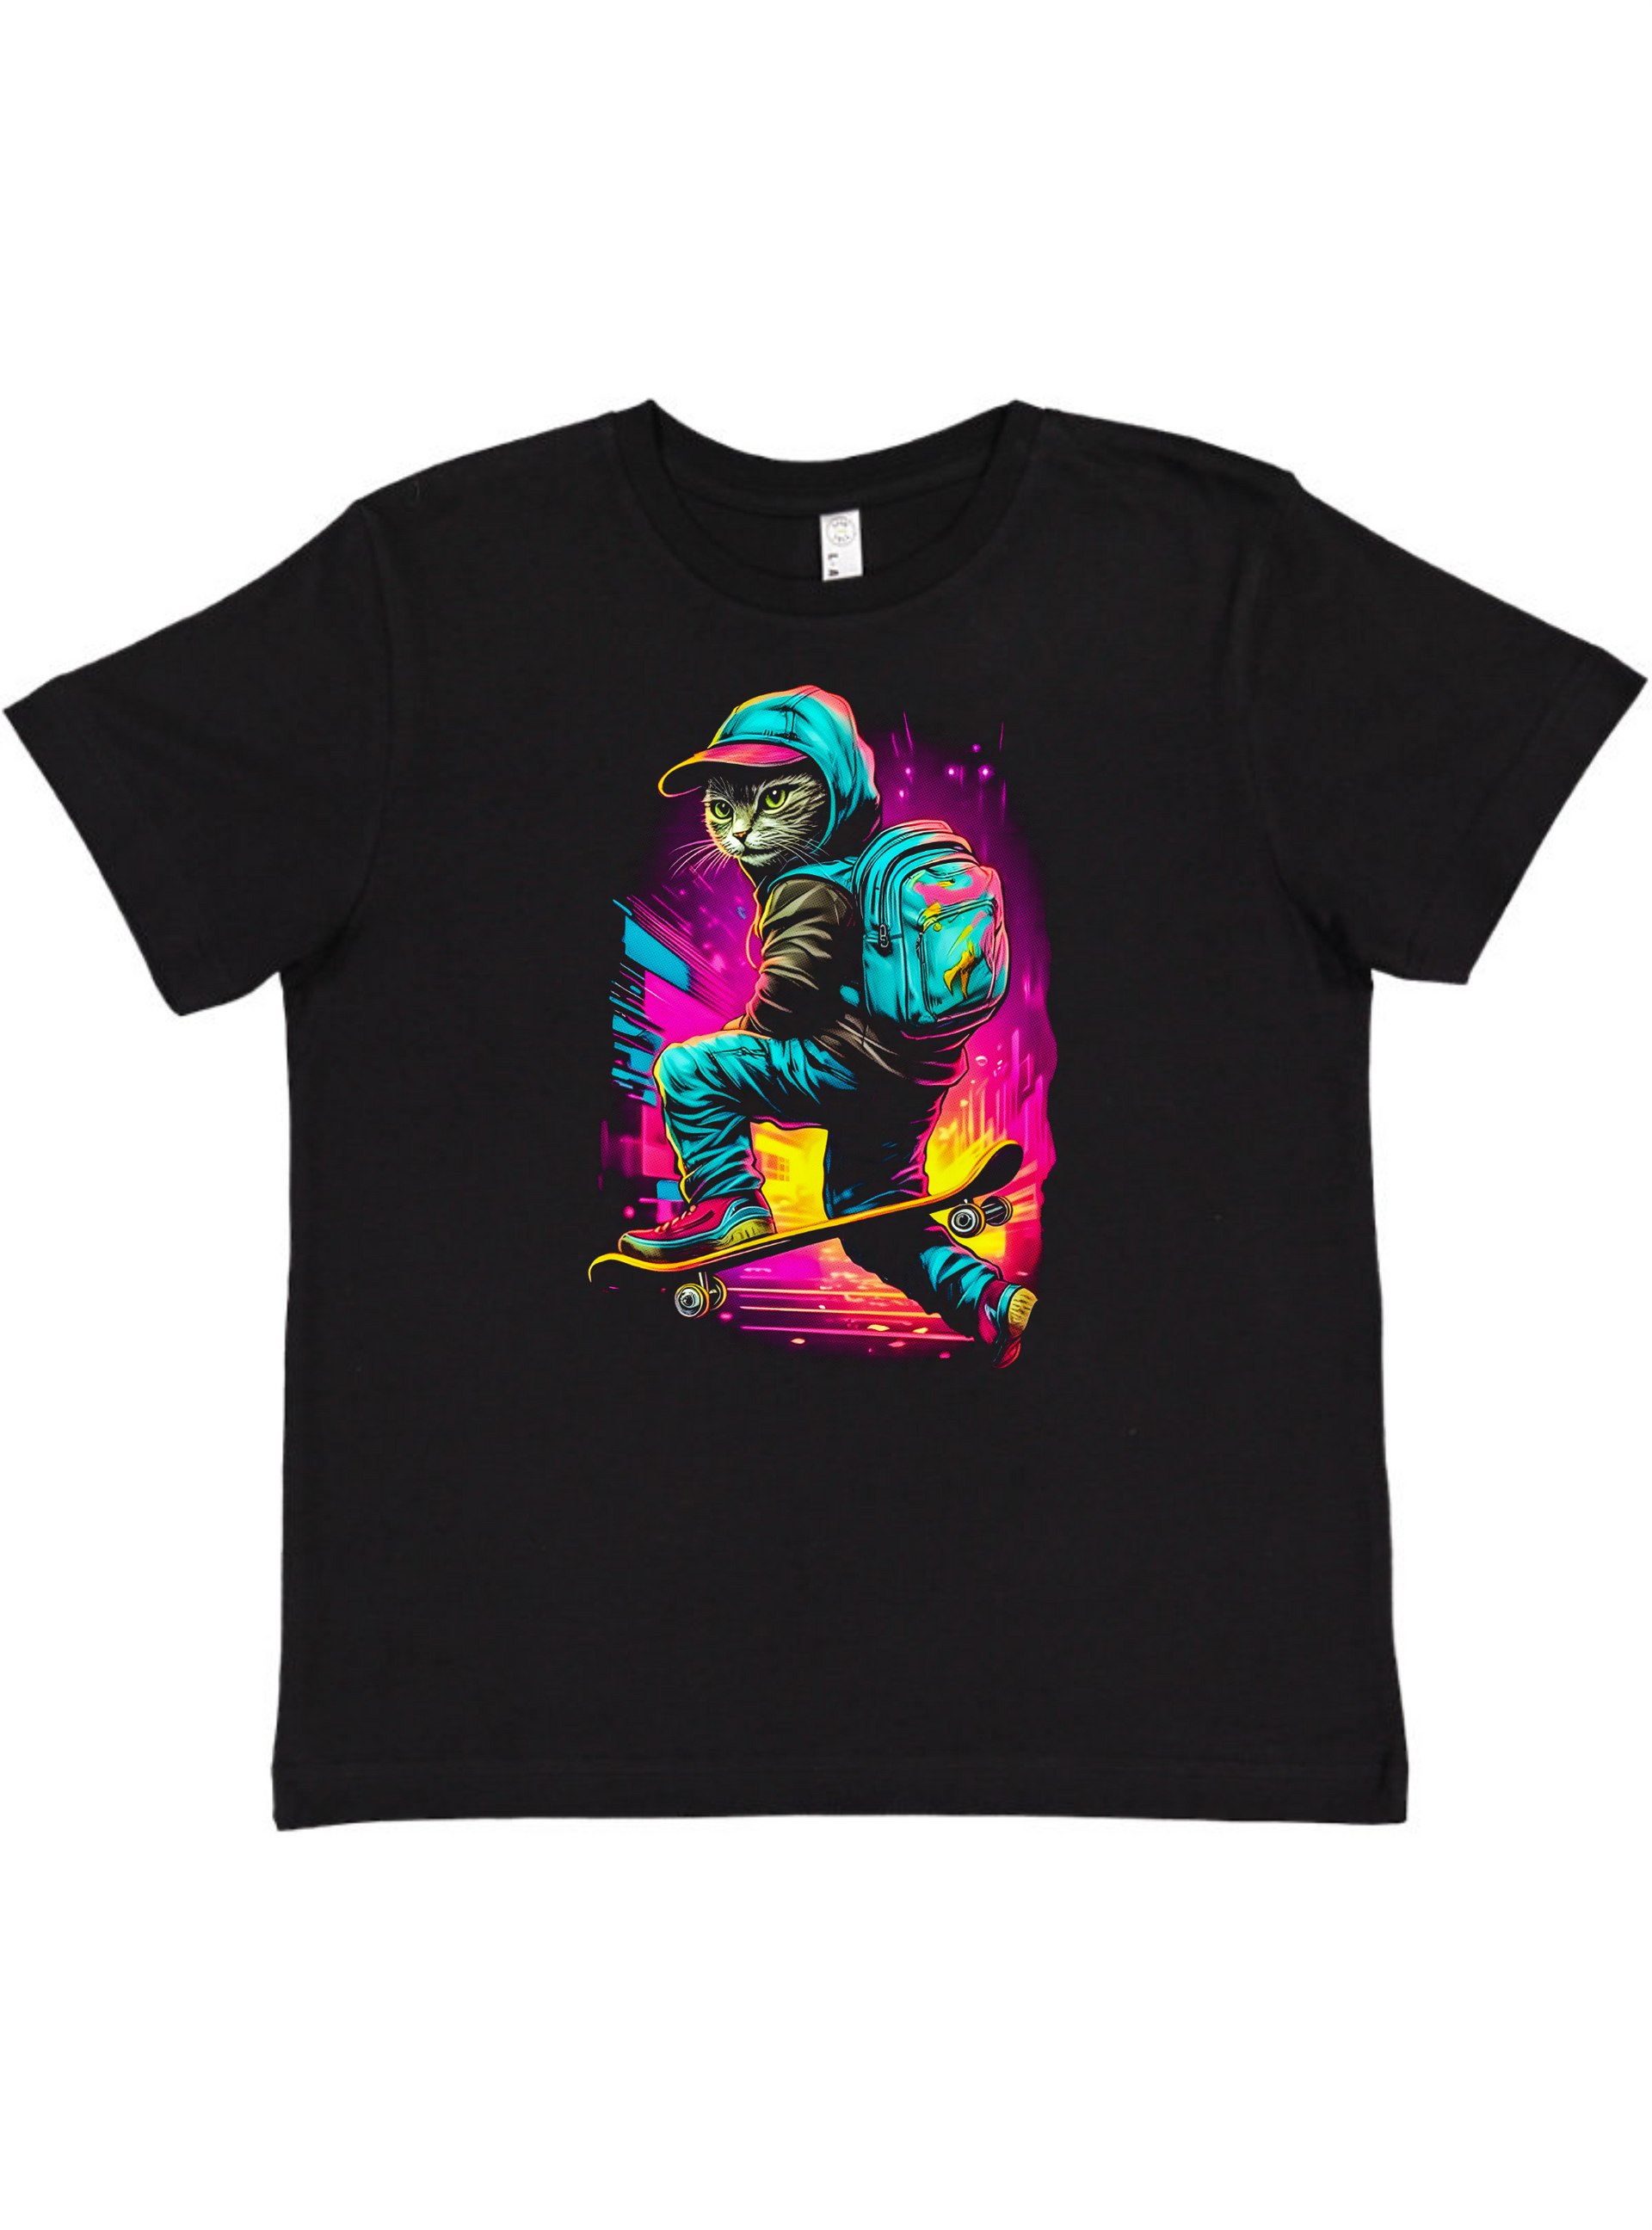 Skate Boarding Cat Youth Tee Adult Shirt by Akron Pride Custom Tees | Akron Pride Custom Tees